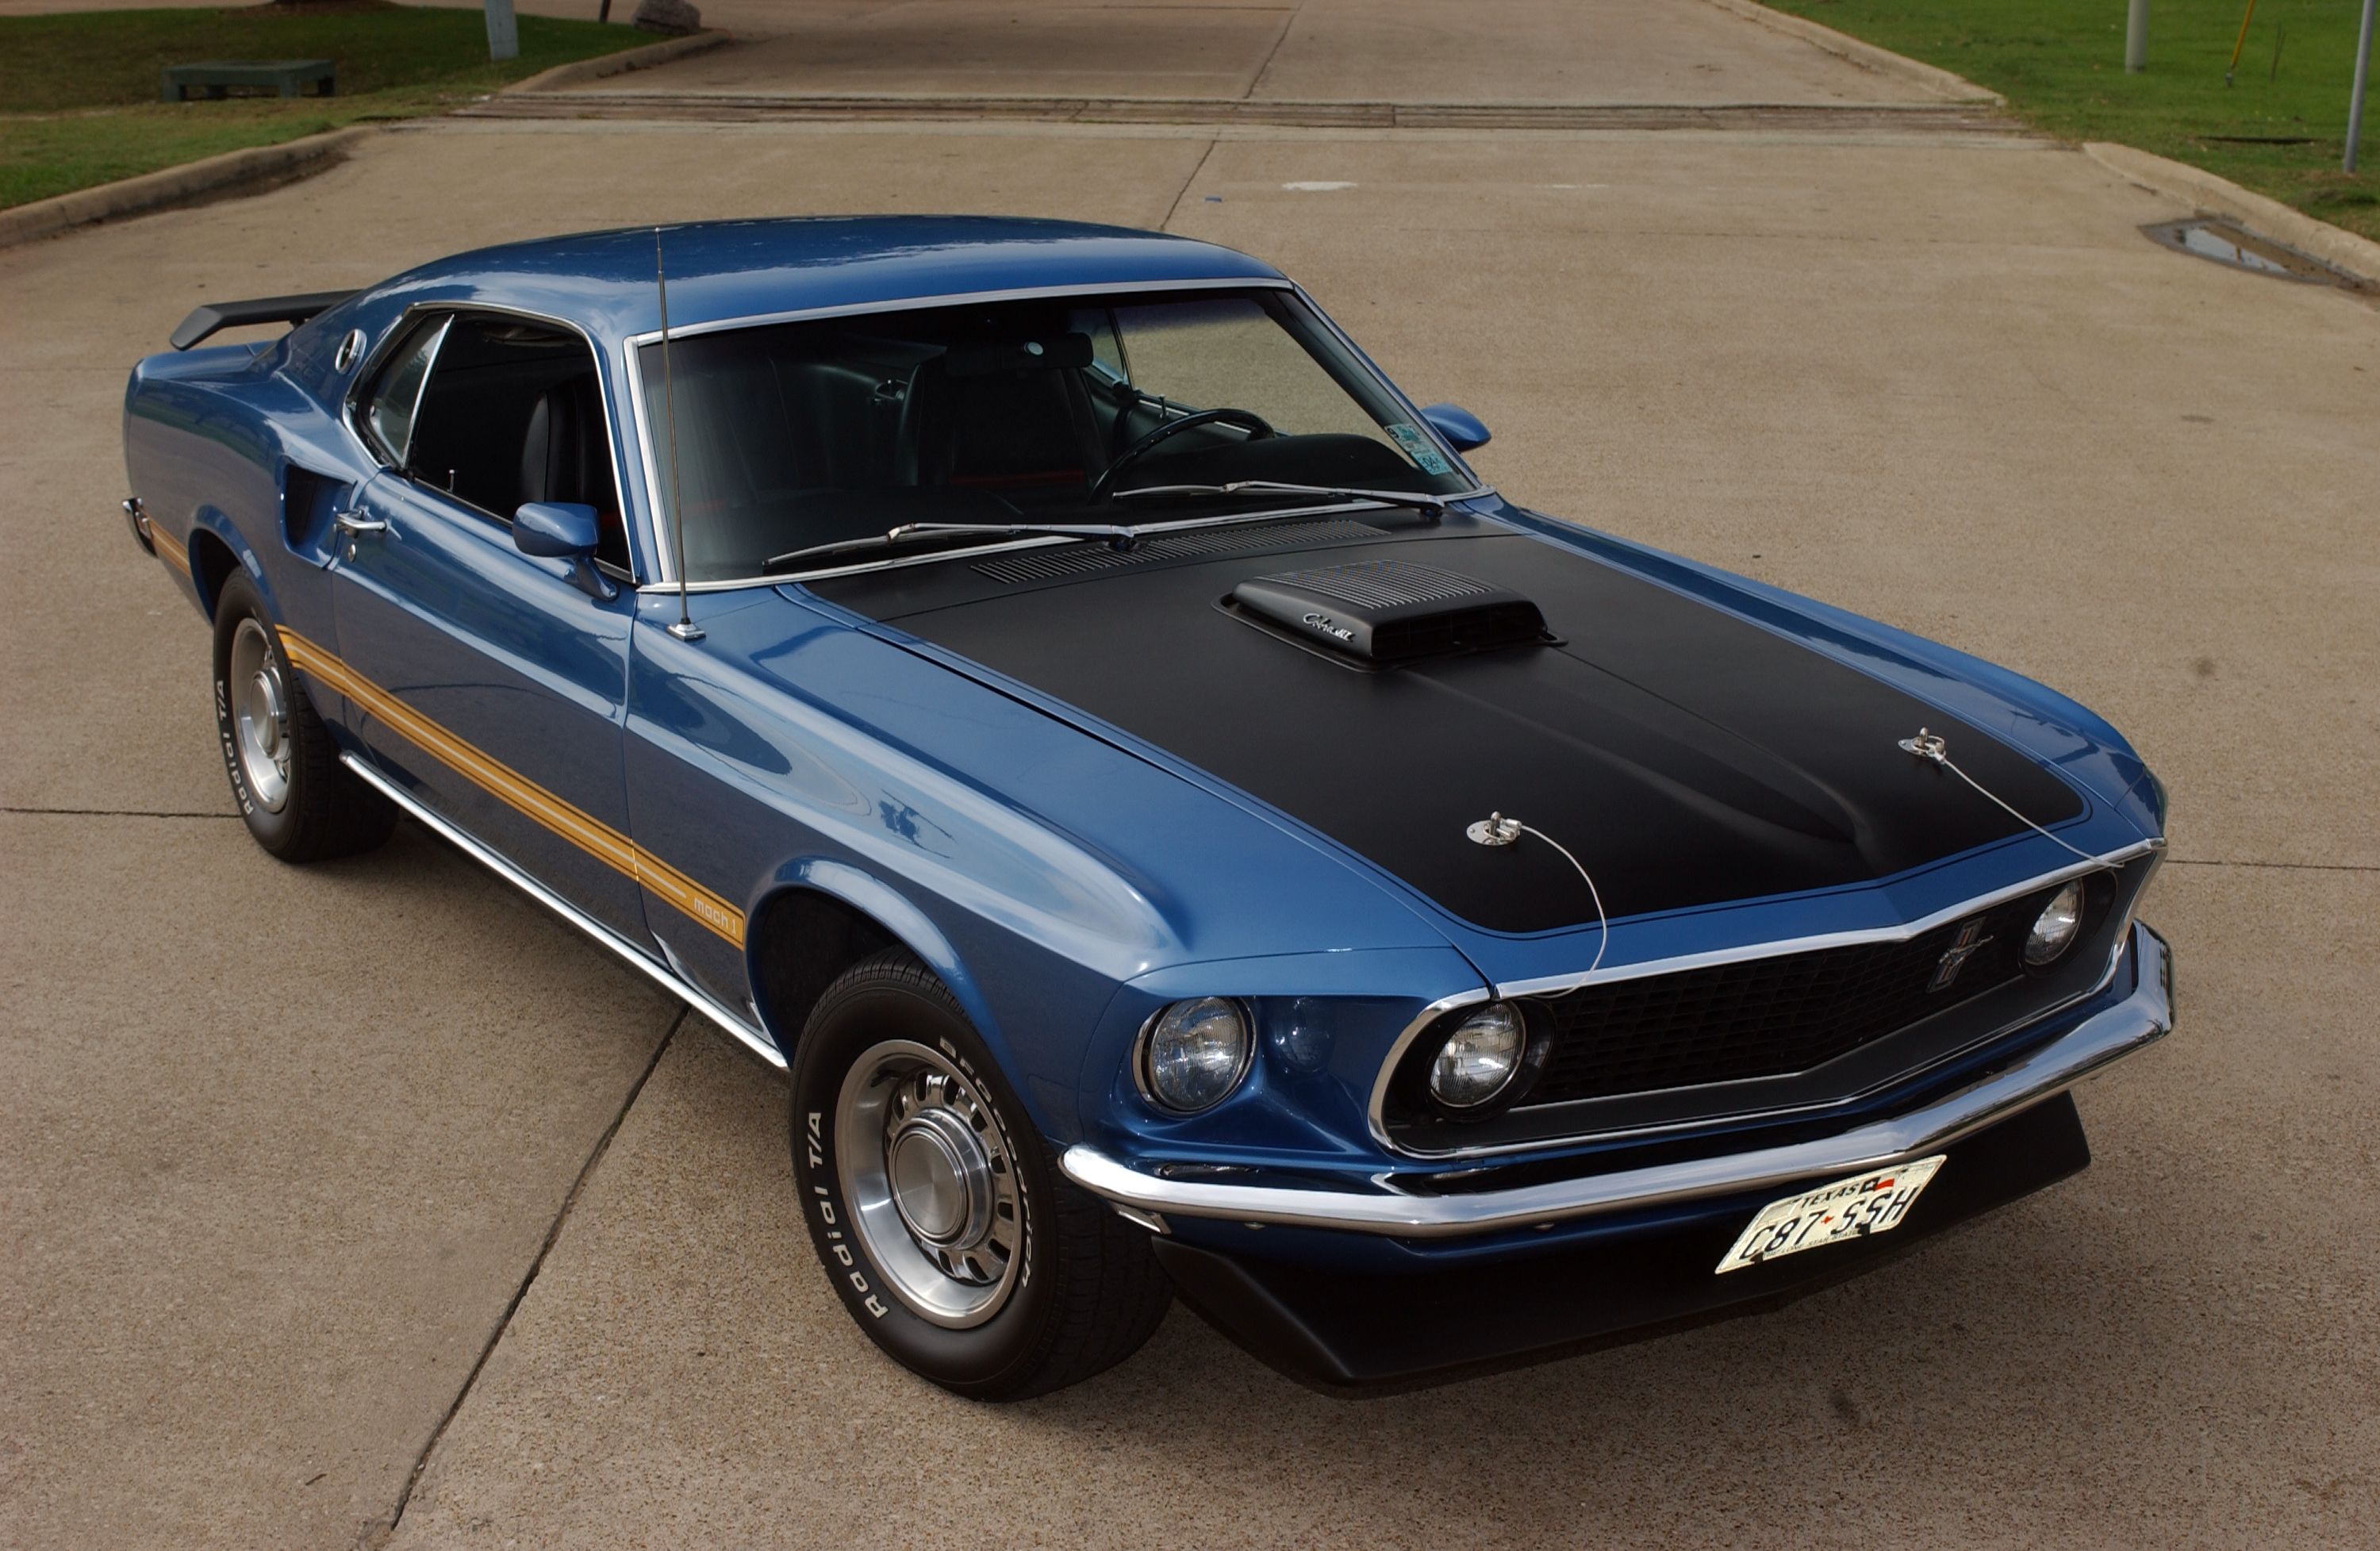 Blue Car Fastback Ford Mustang Mach 1 Muscle Car 3000x1955